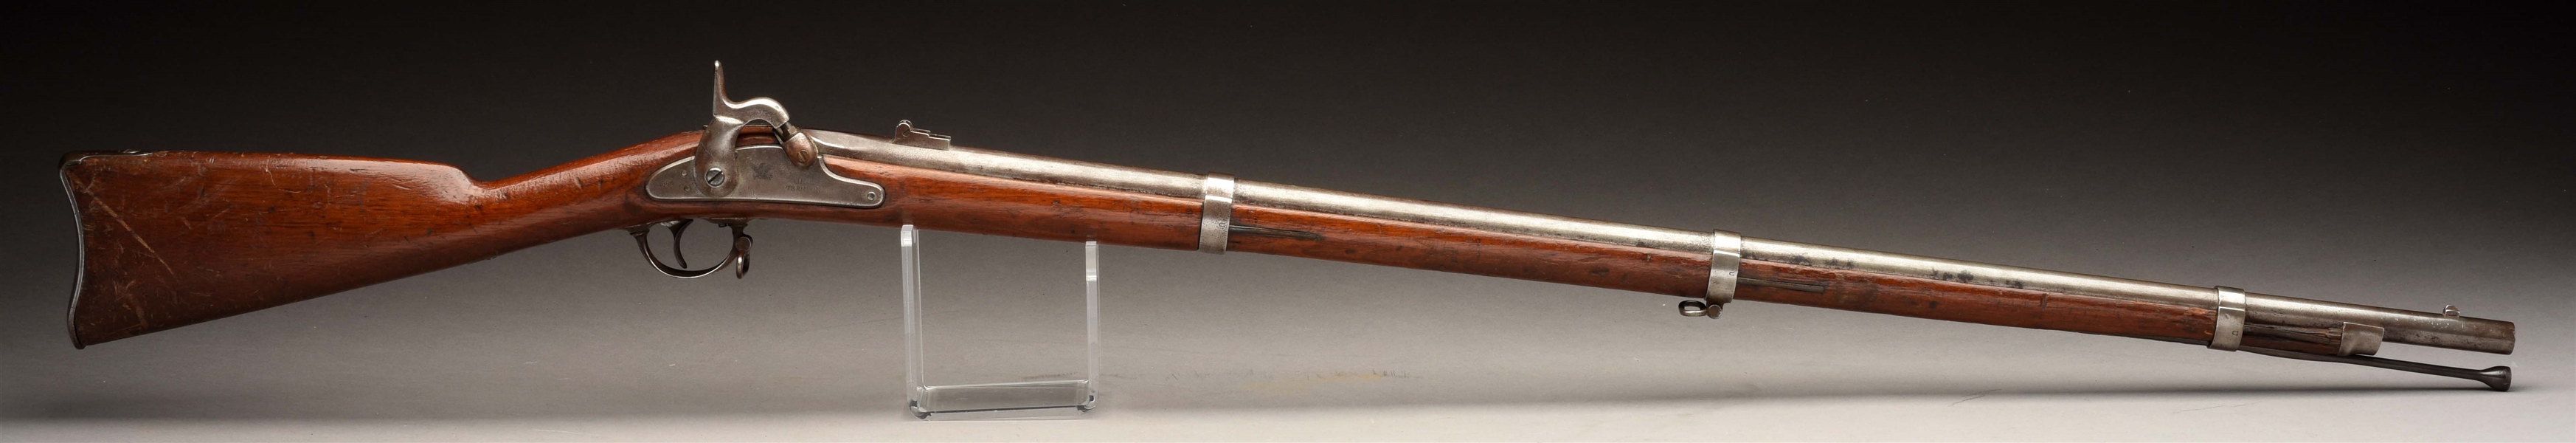 (A) DOCUMENTED AUDIE MURPHY USED "MGM" MARKED MODEL 1861 TRENTON PERCUSSION MUSKET FROM RED BADGE OF COURAGE.